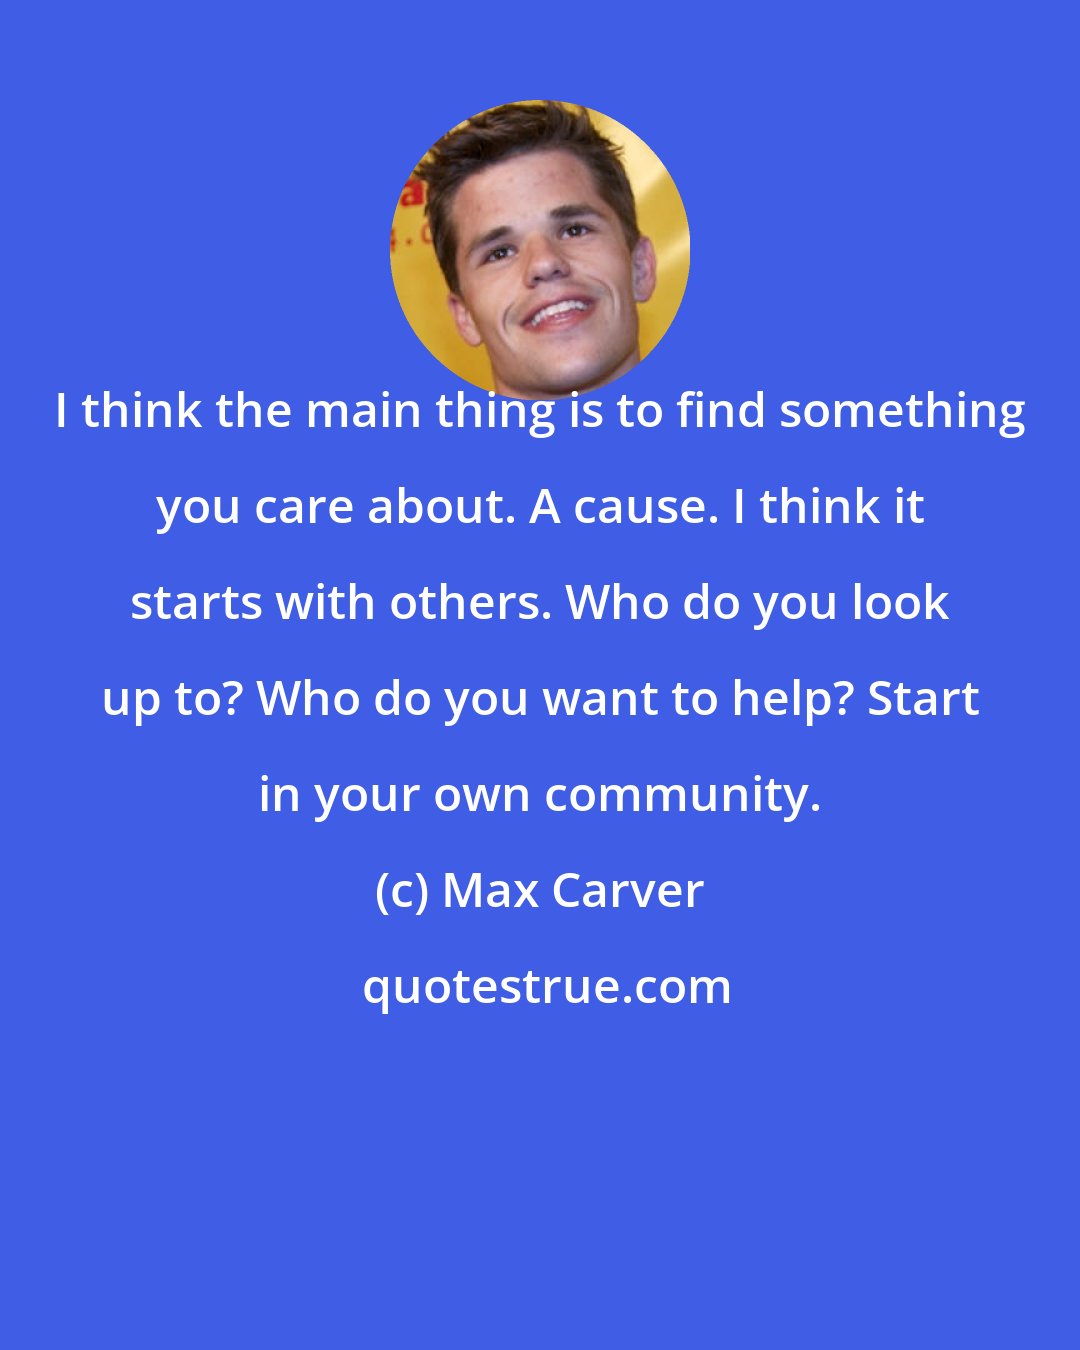 Max Carver: I think the main thing is to find something you care about. A cause. I think it starts with others. Who do you look up to? Who do you want to help? Start in your own community.